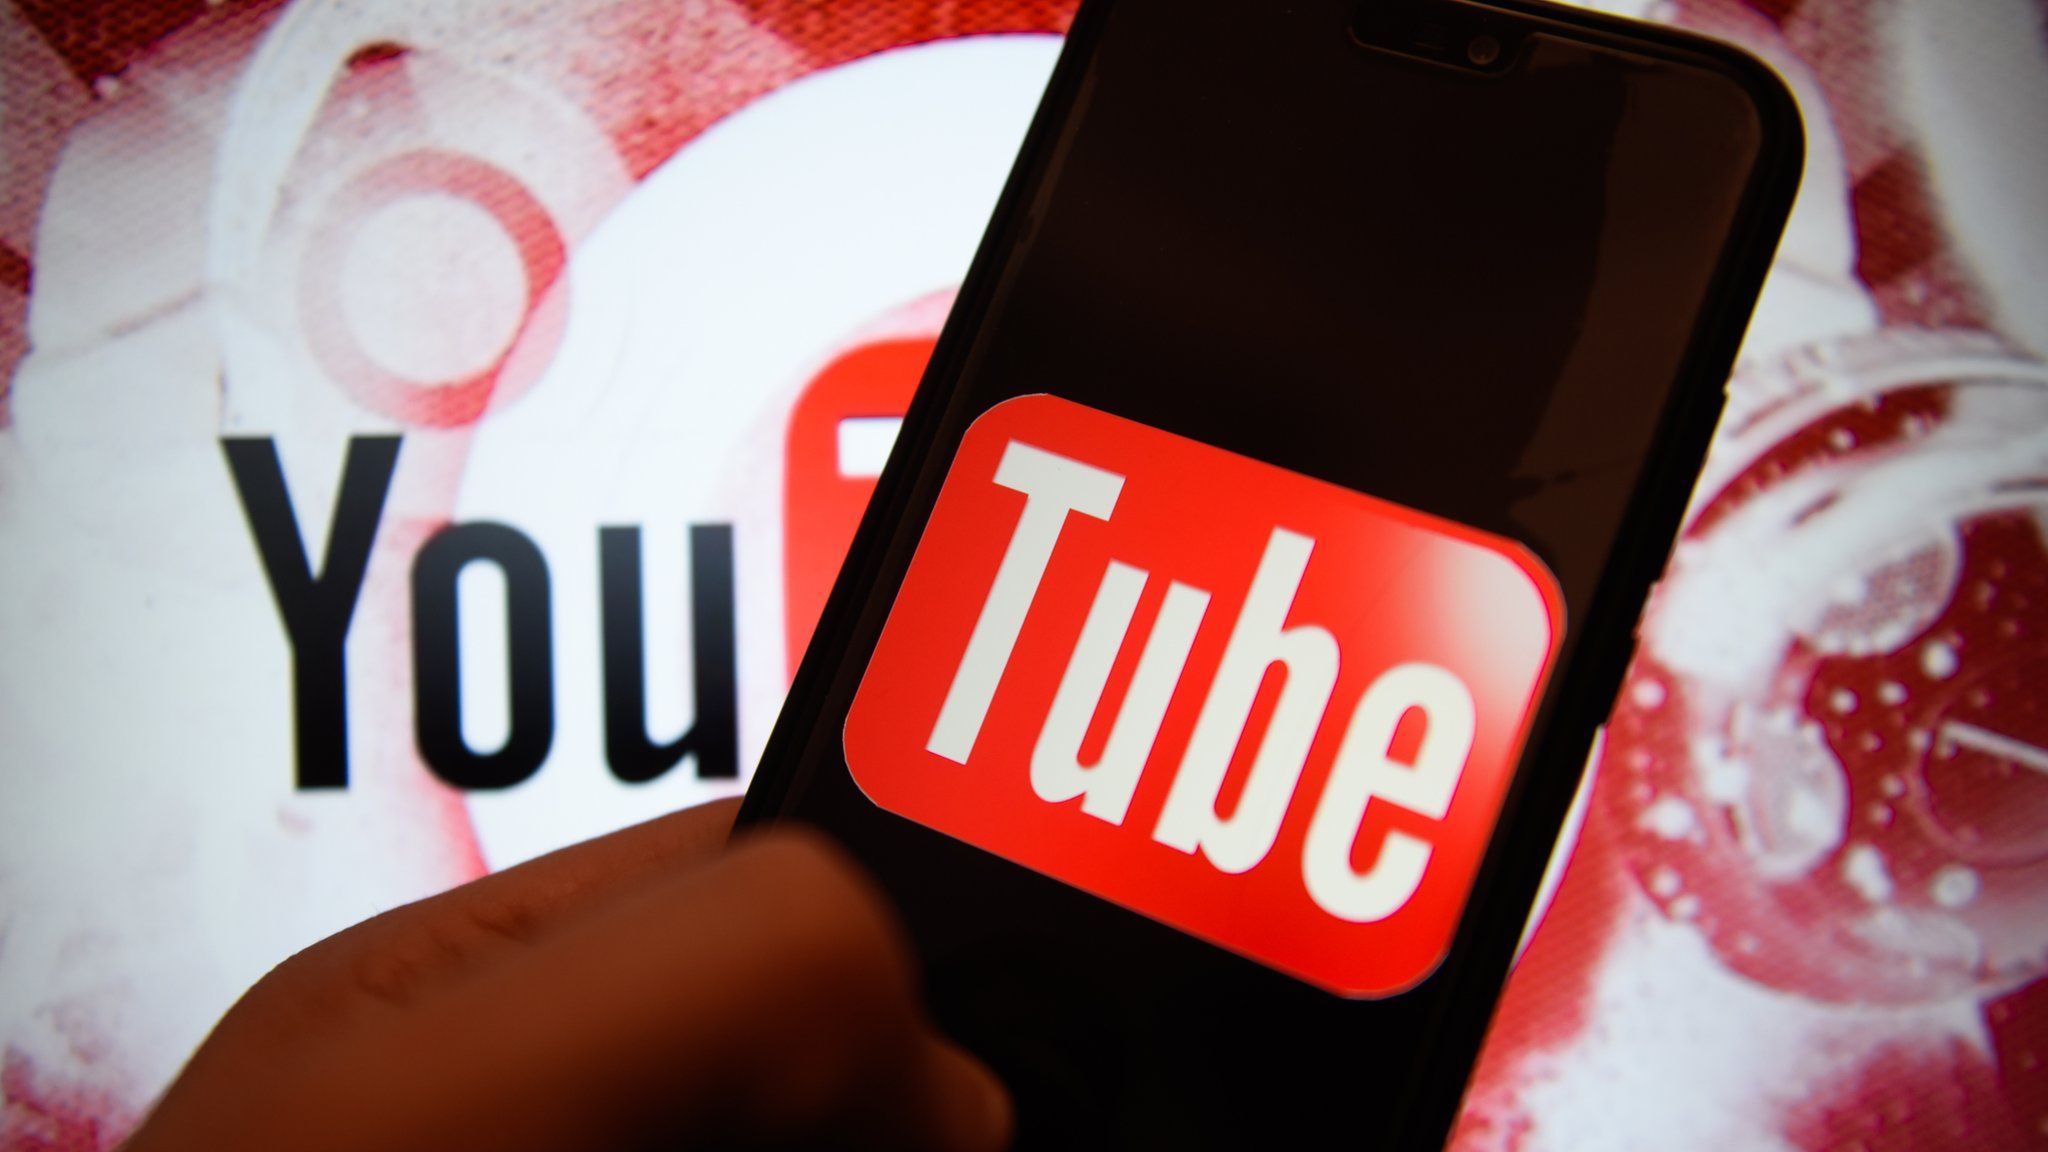 Youtube logo is seen on an android mobile phone.